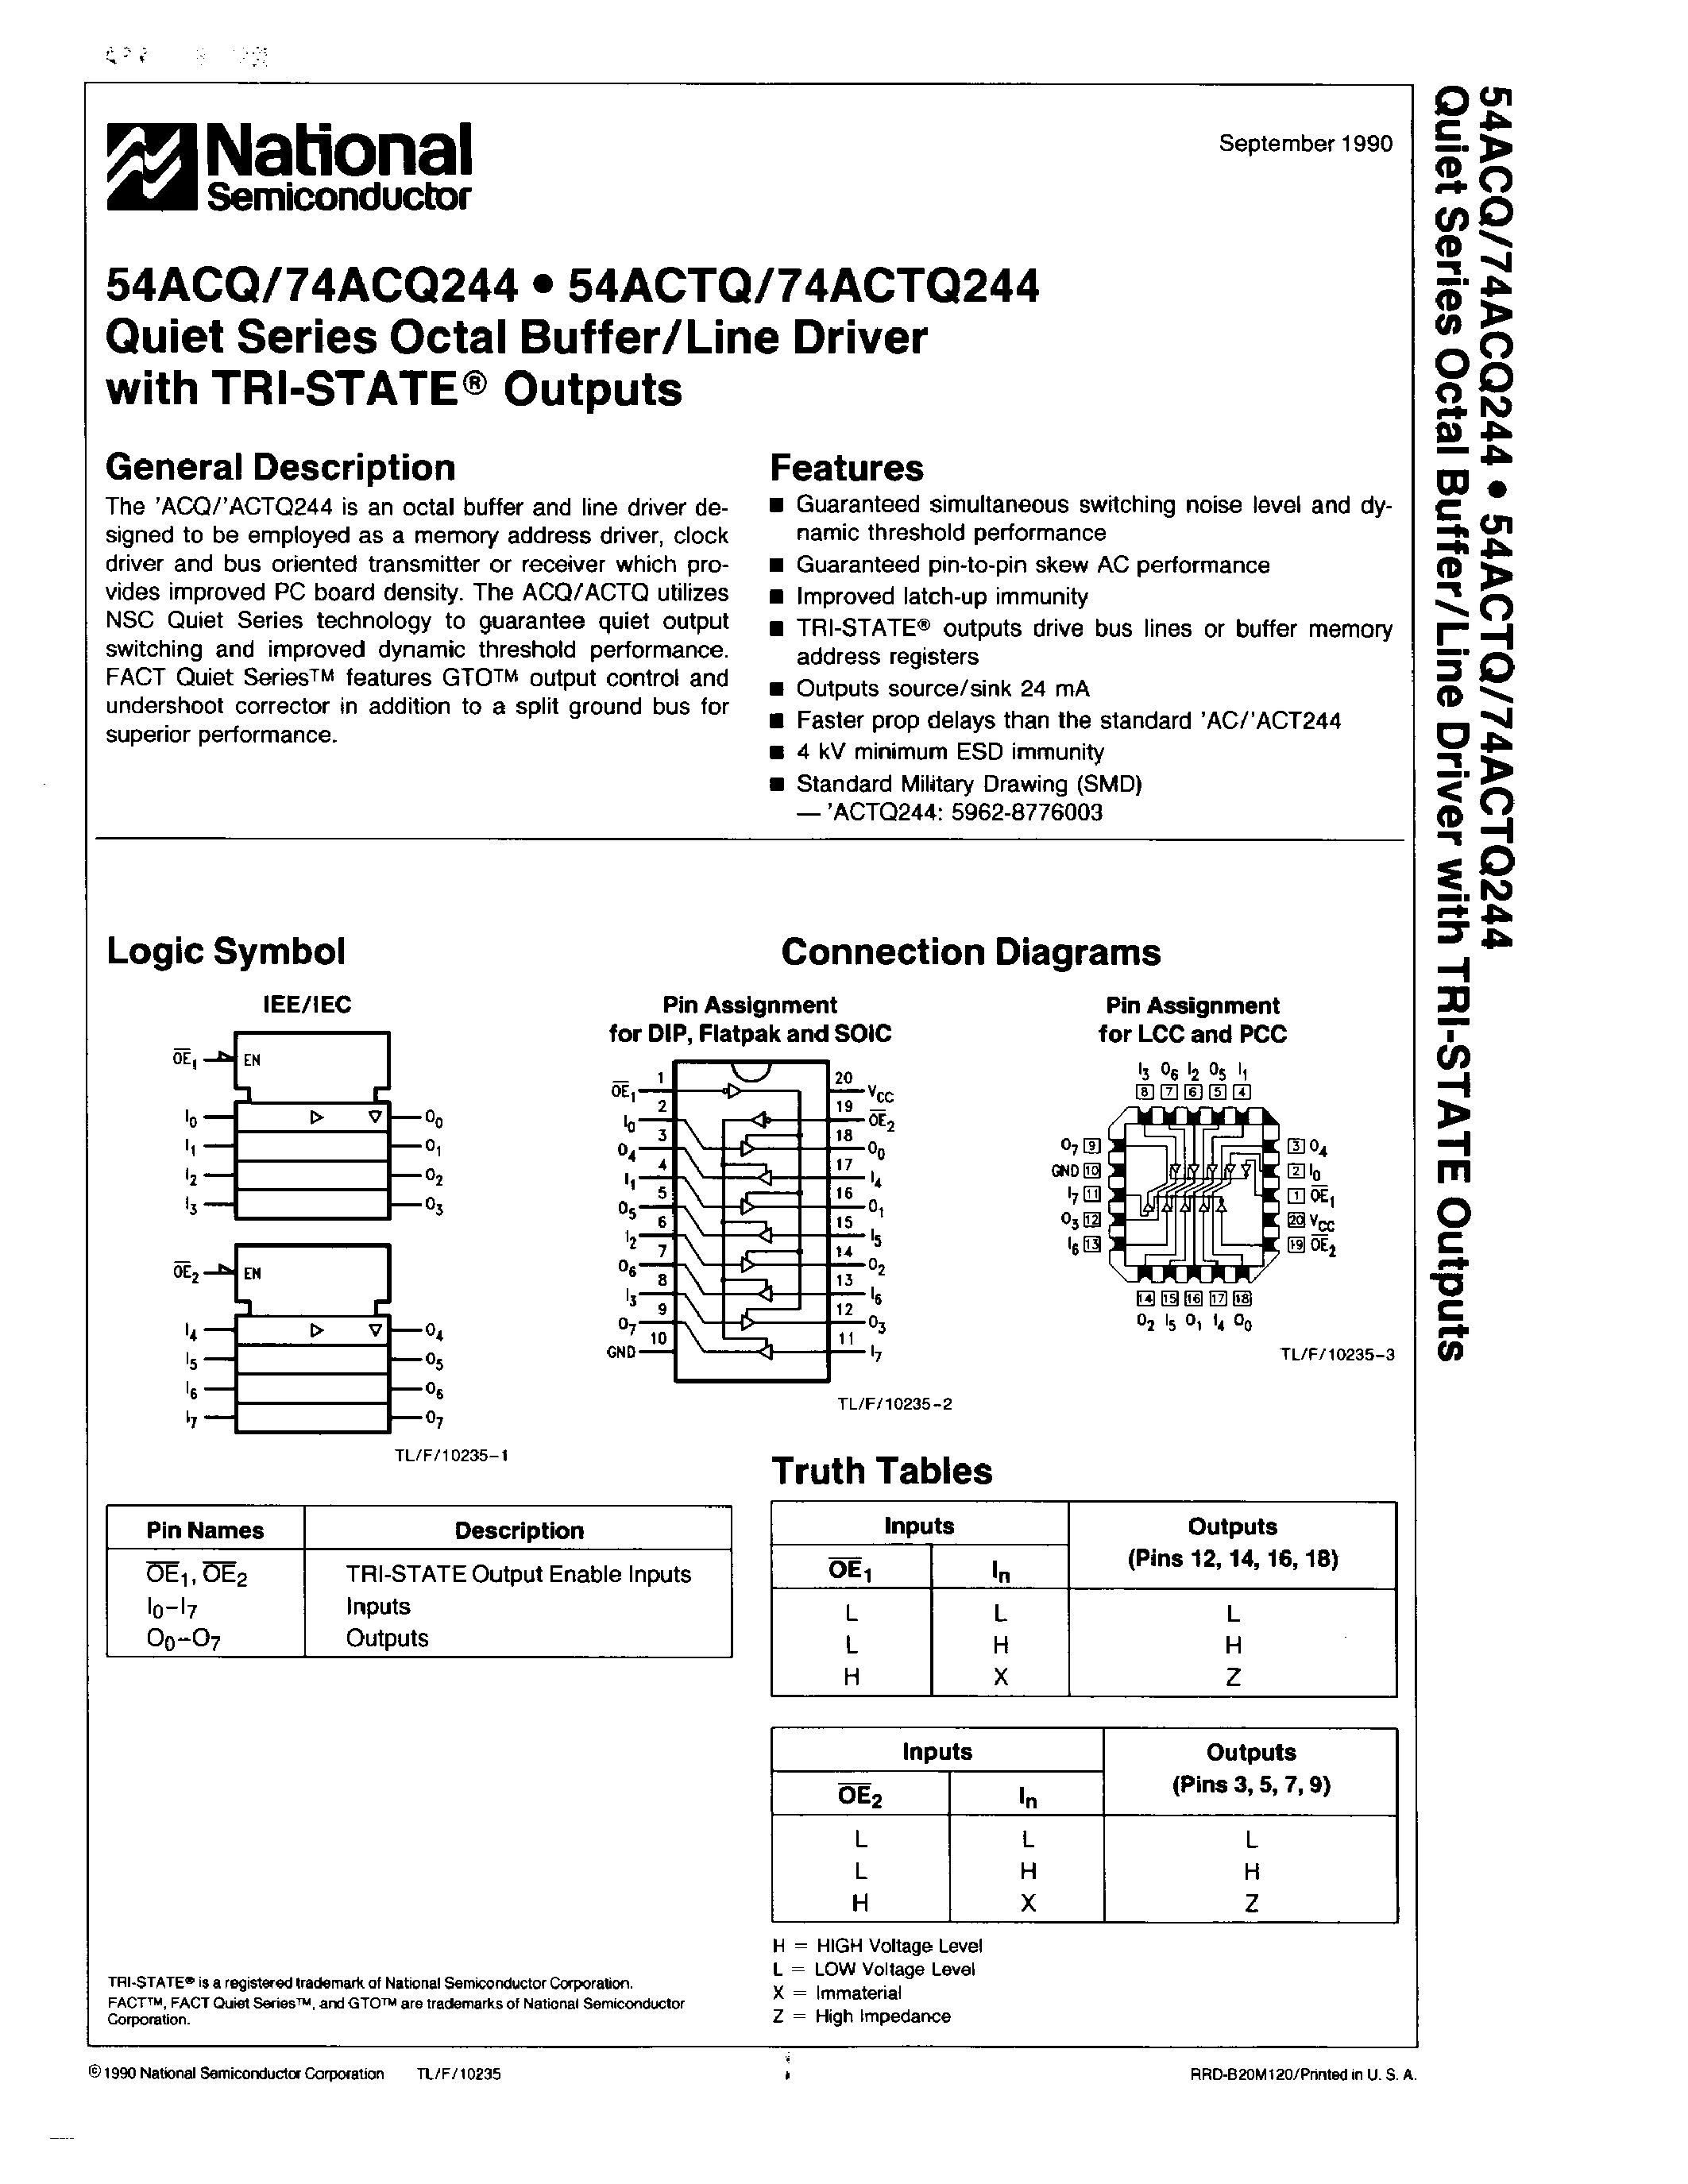 Datasheet 74ACQ244F - Quiet Seres Octal Buffer/Line Driver with TRI-STATE Outputs page 1